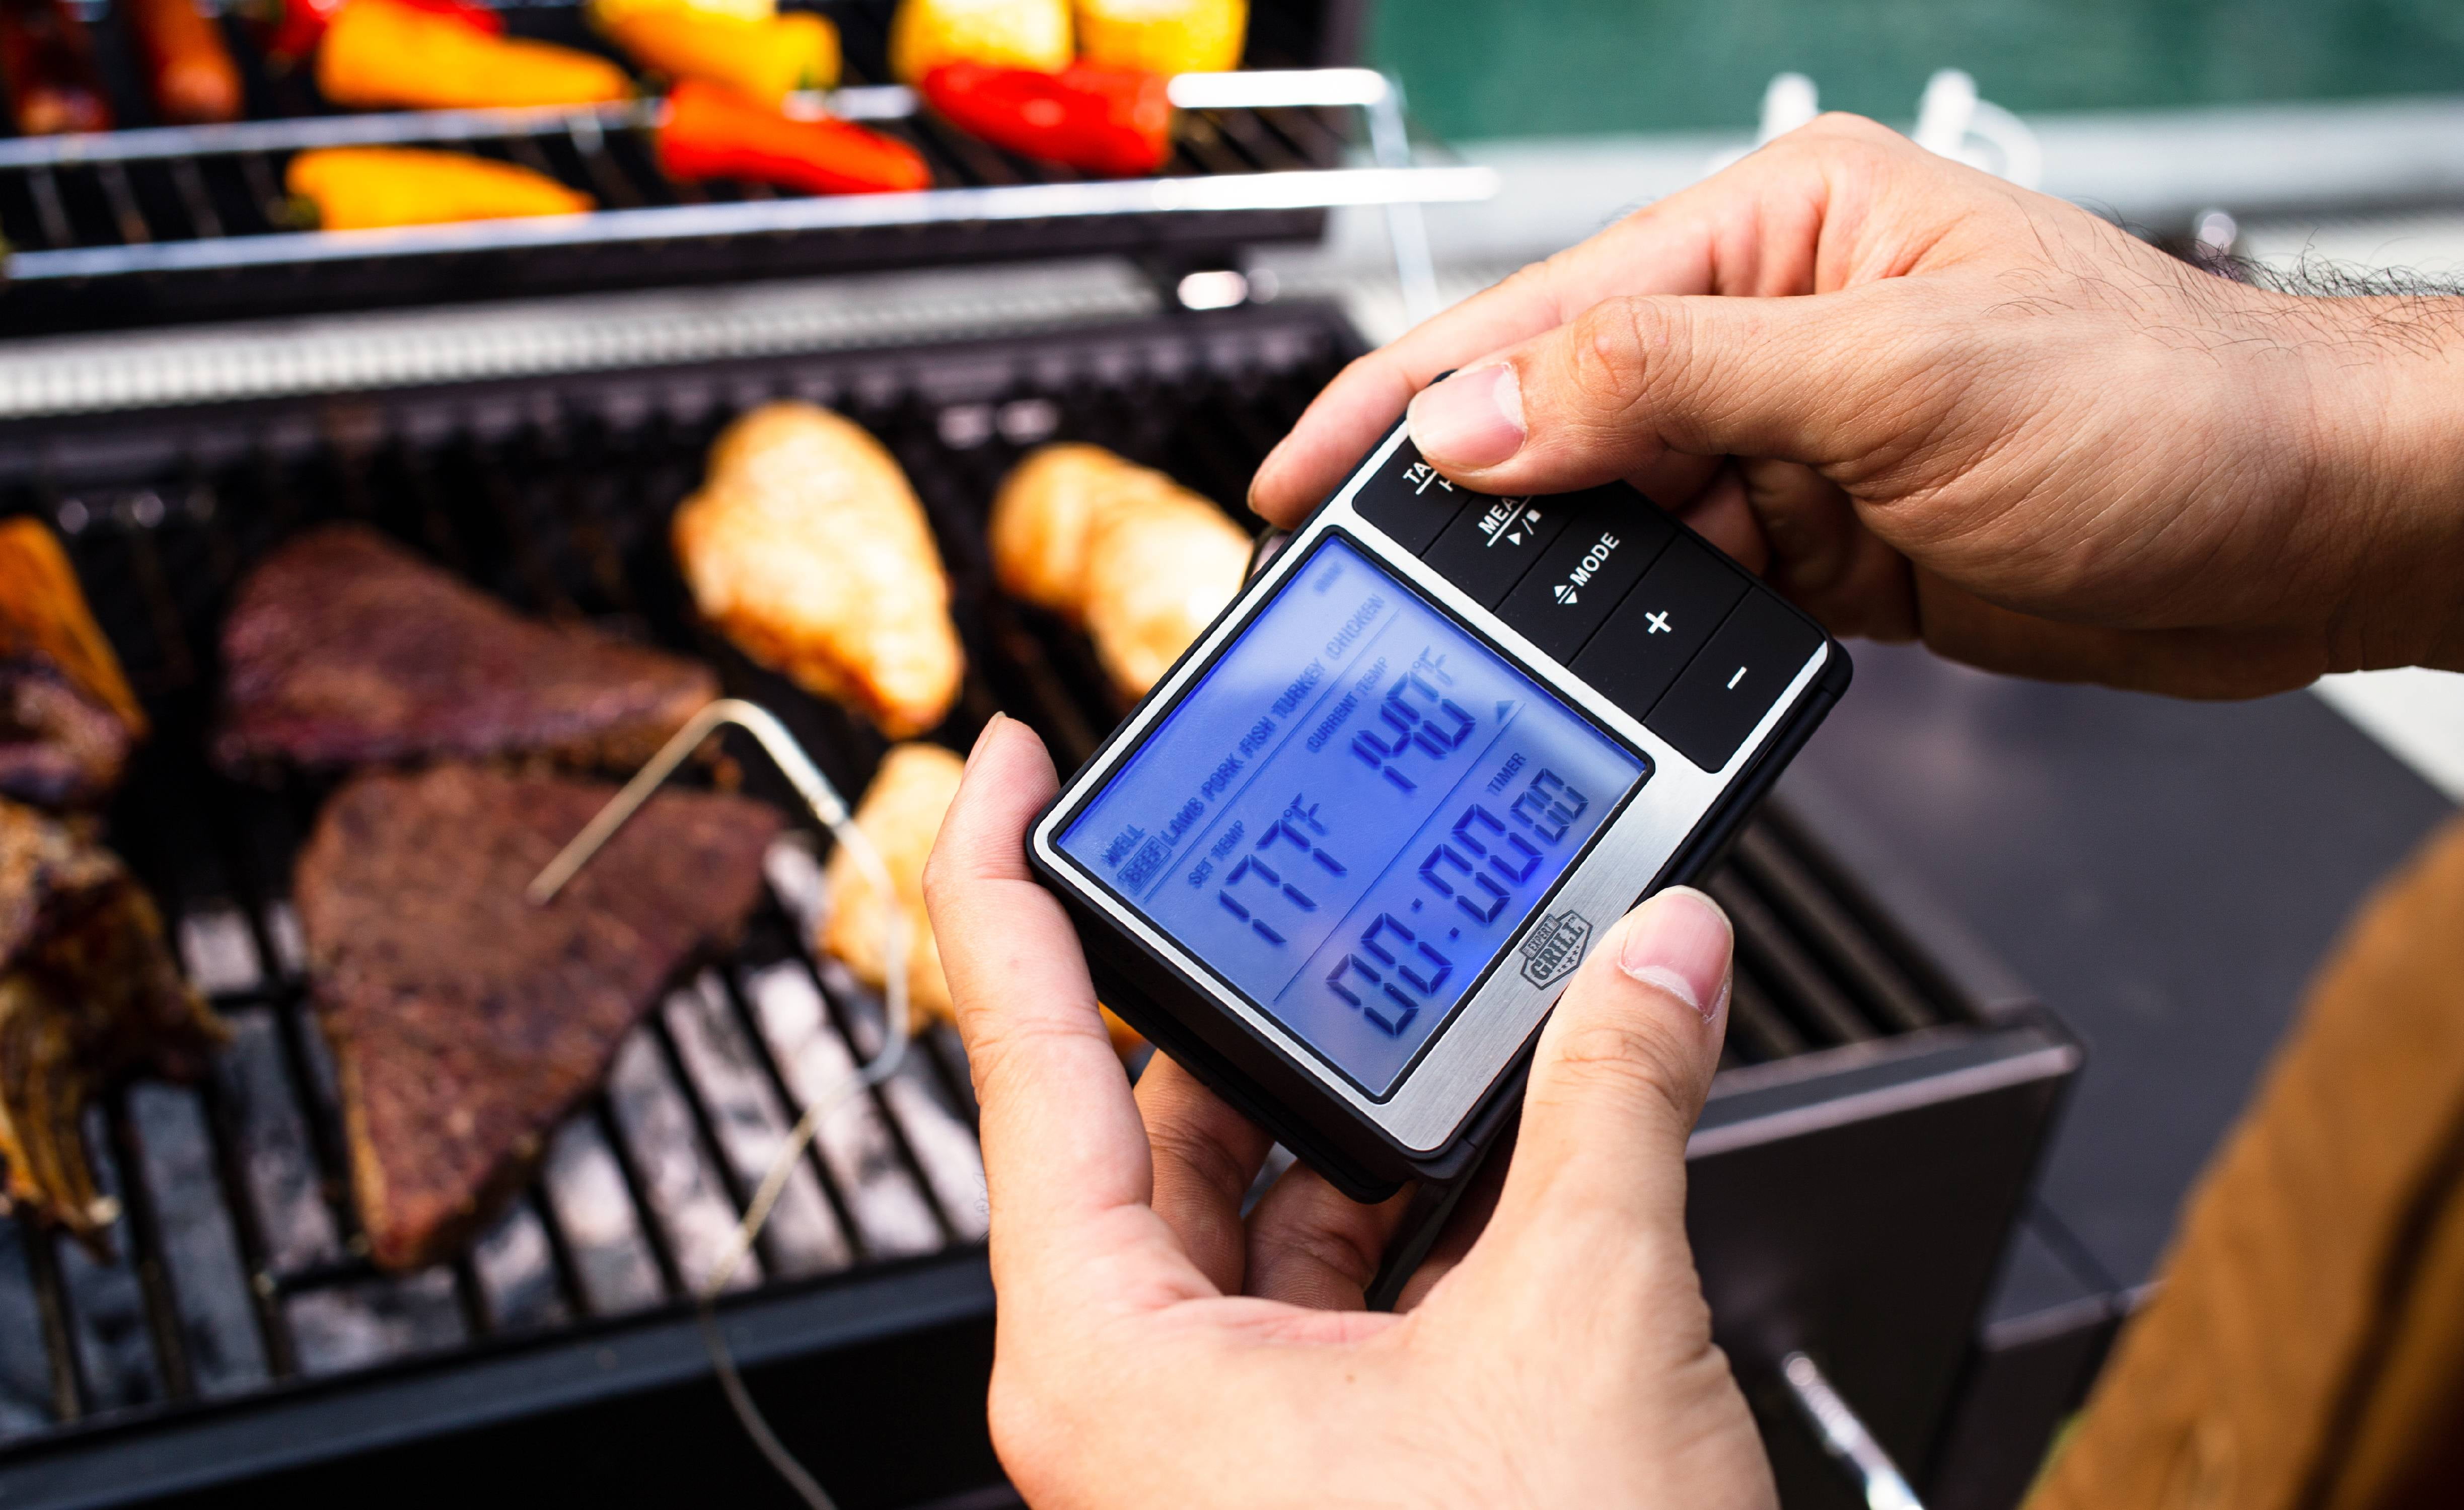 Expert Grill Digital Meat Thermometer Fork 